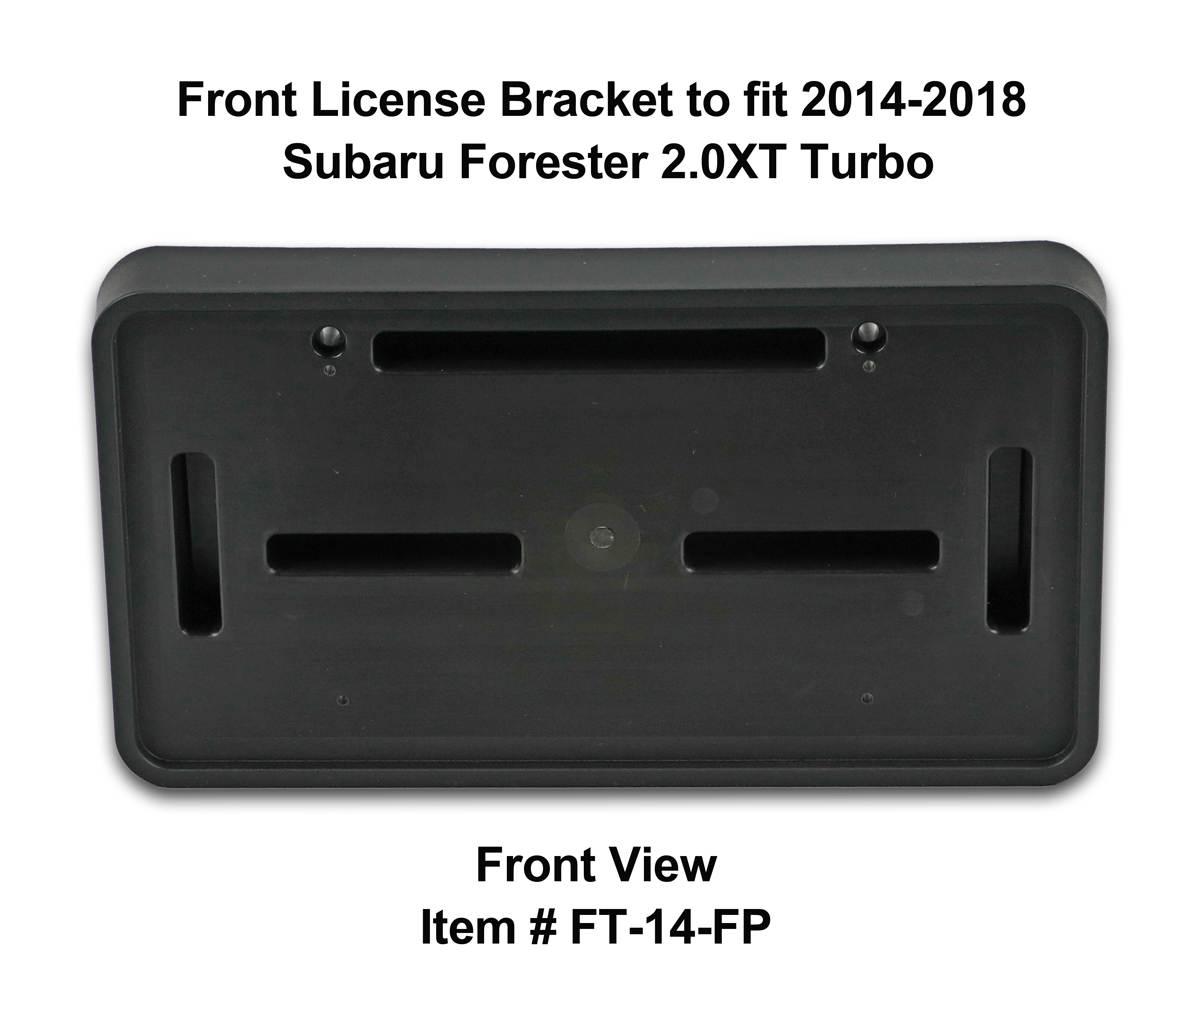 Front License Plate Frame/Bracket Assembly to fit 2014-15-16-17-18 Subaru Forester 2.0XT Turbo 2018 Subaru Forester Front License Plate Bracket